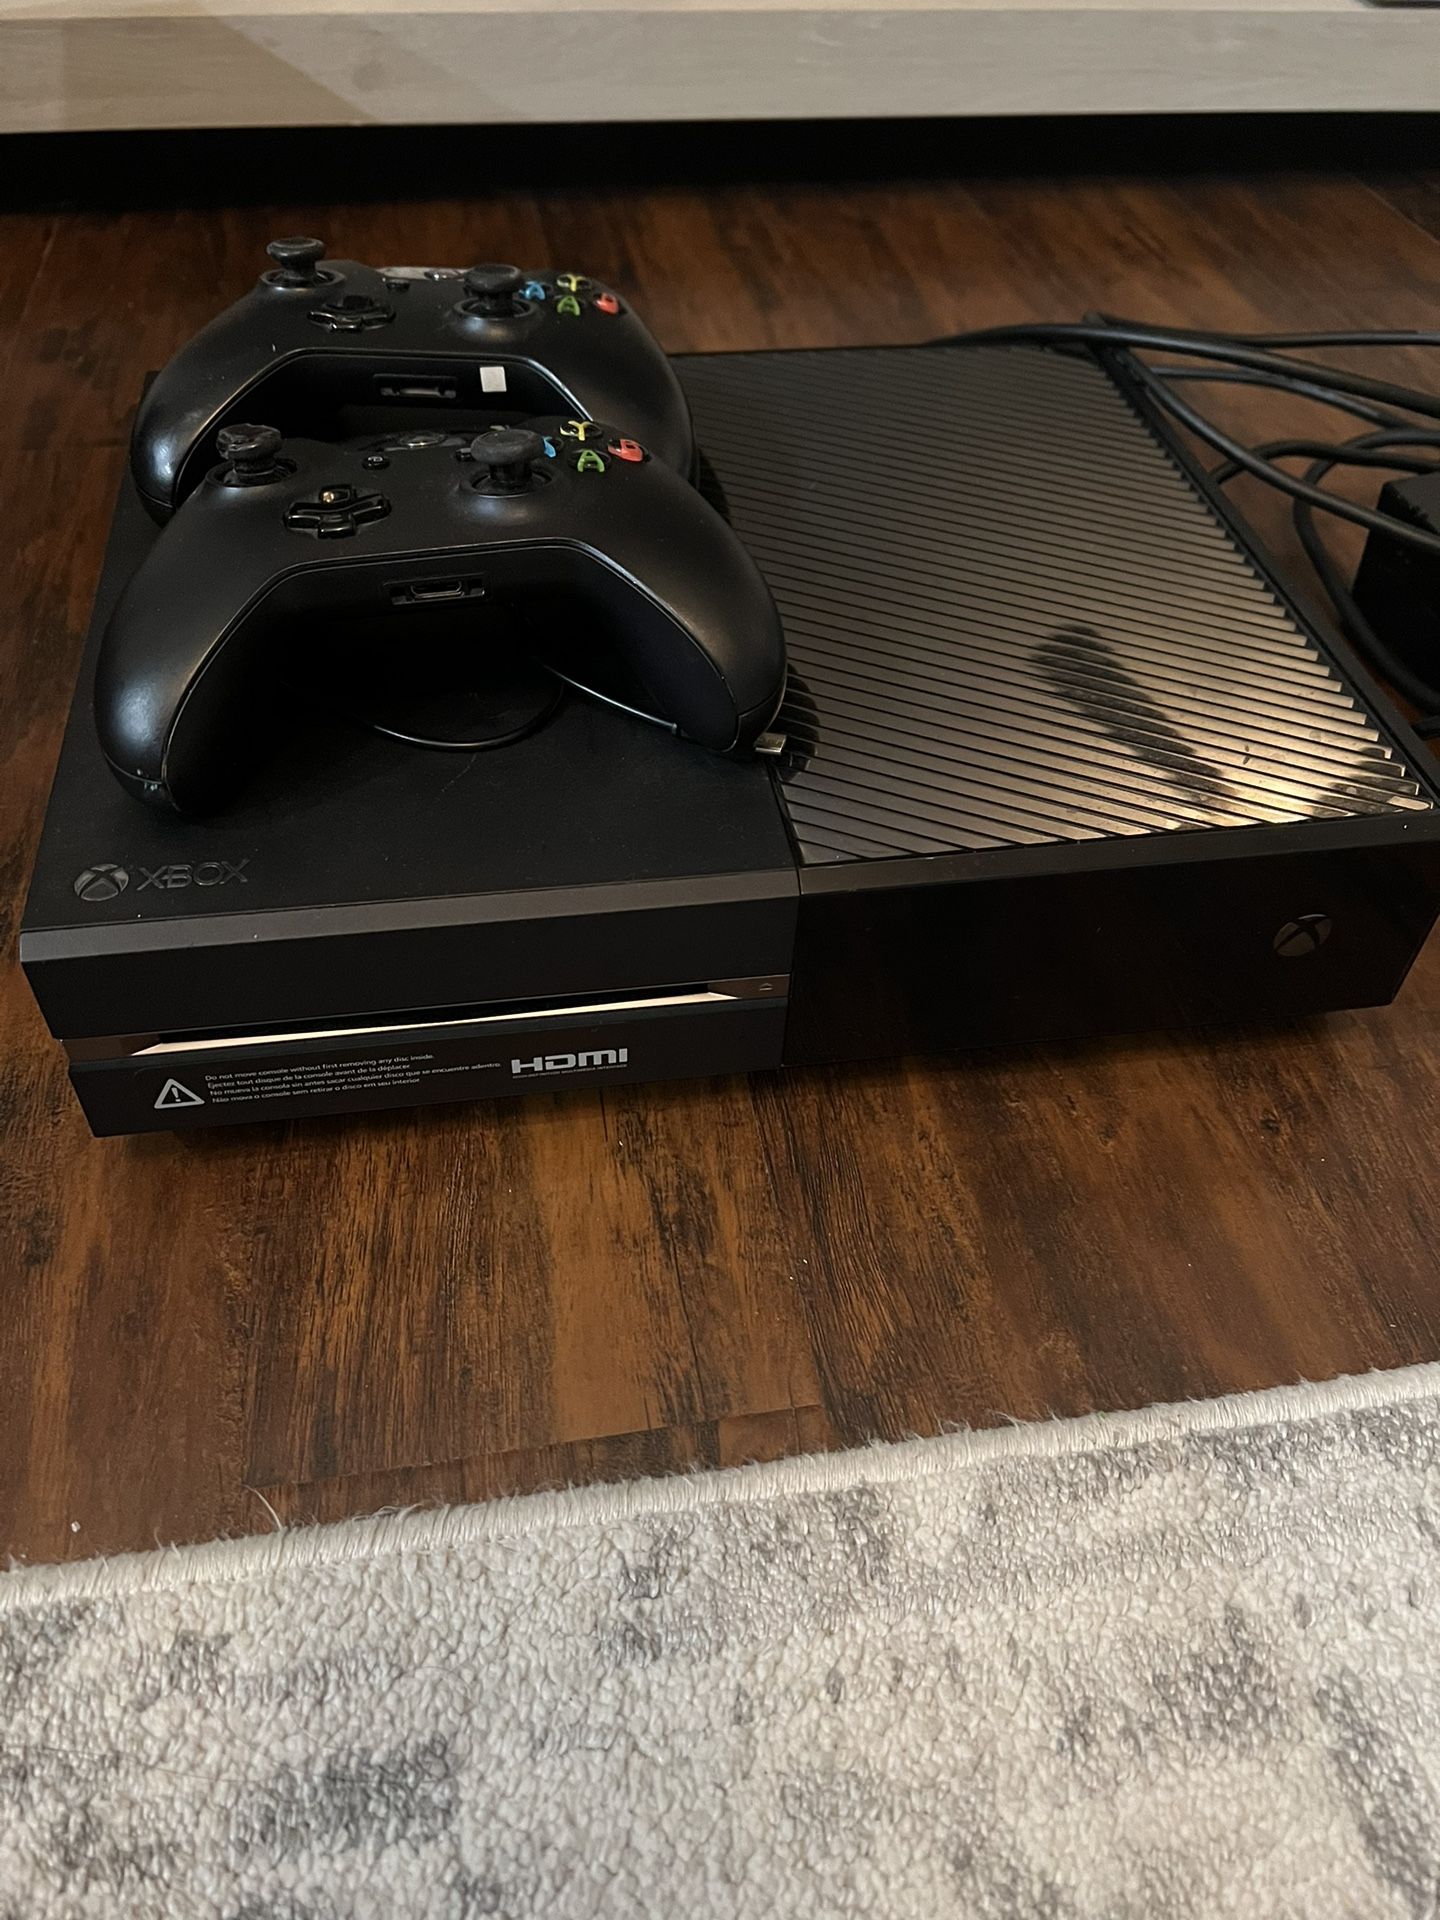 Xbox One With 2 Remotes And Games